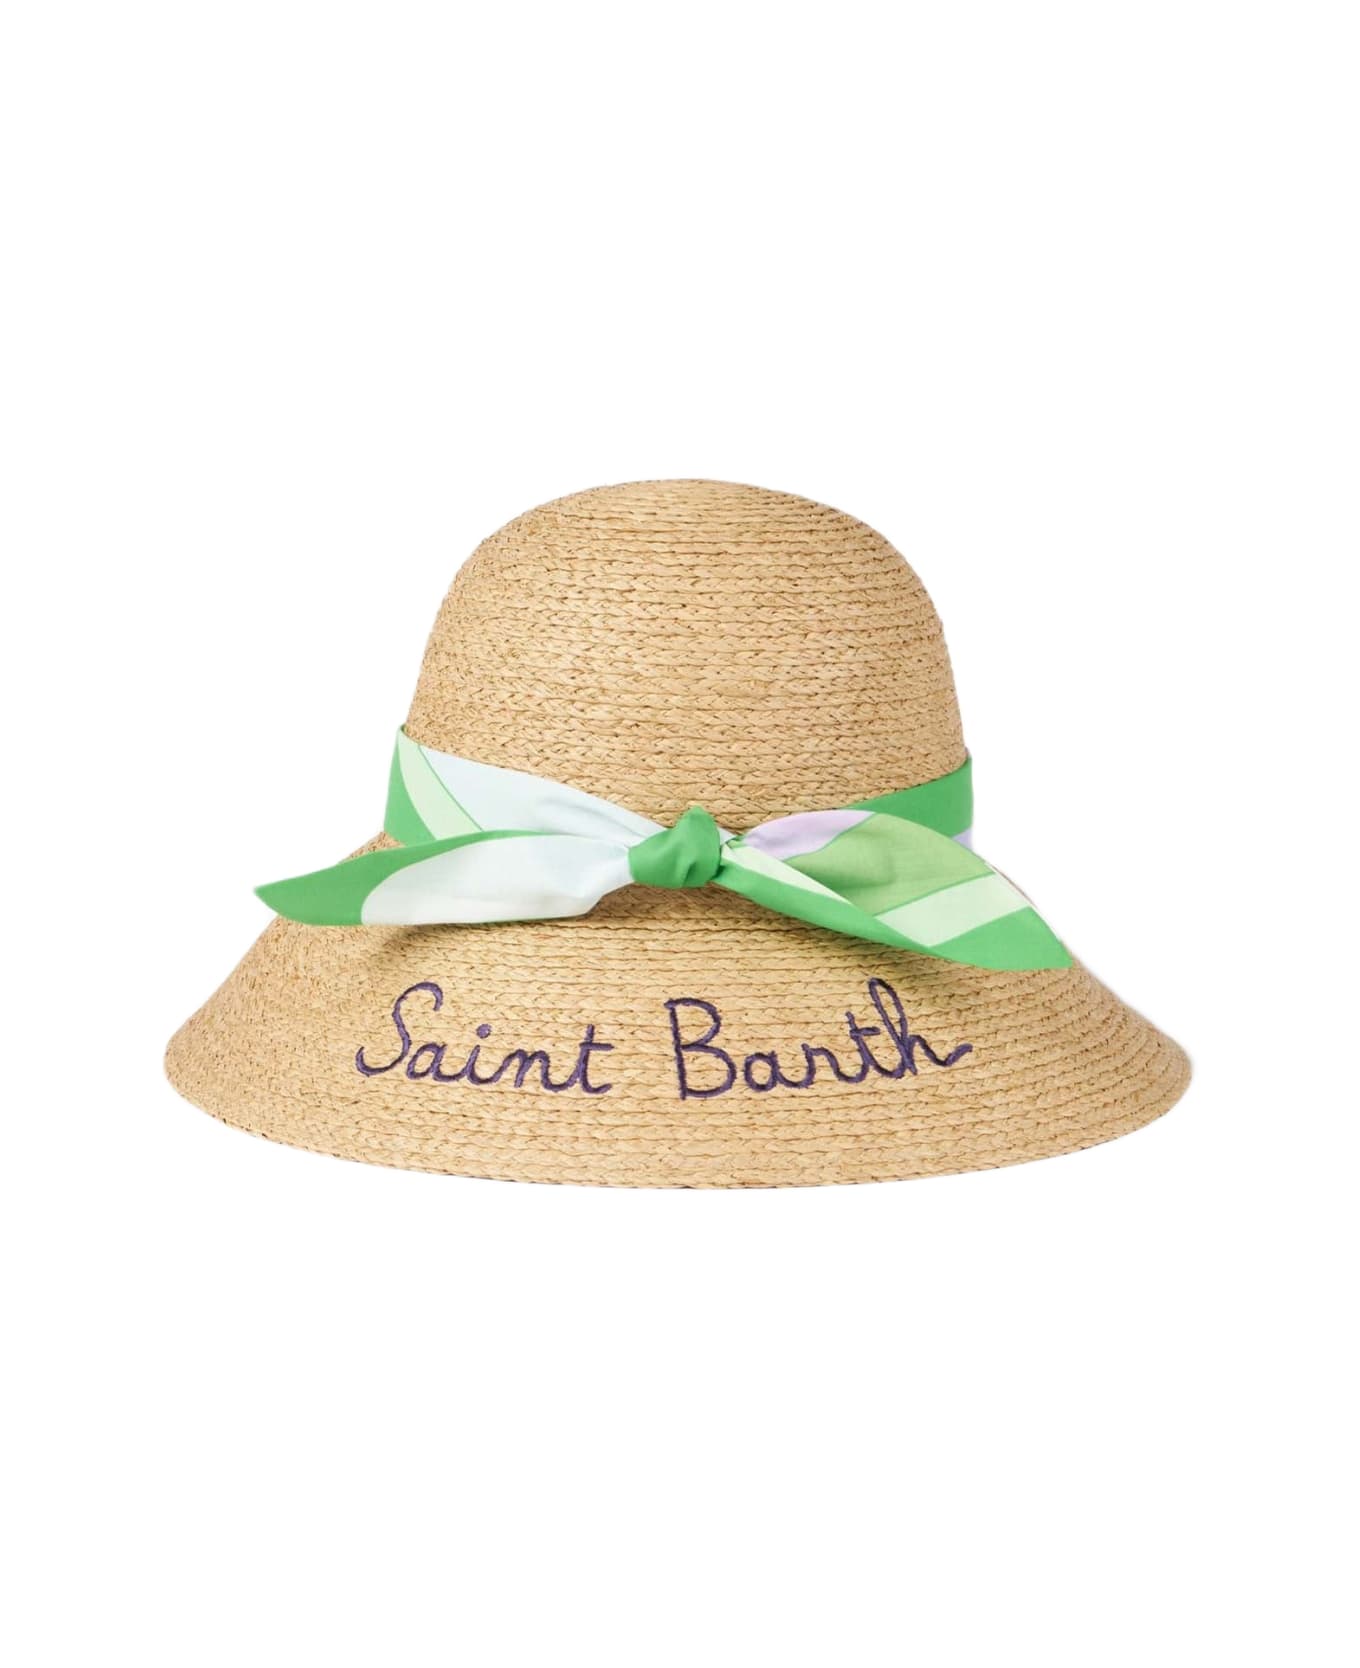 MC2 Saint Barth Woman Straw Bucket With Front Embroidery And Multicolor Printed Stripe - WHITE